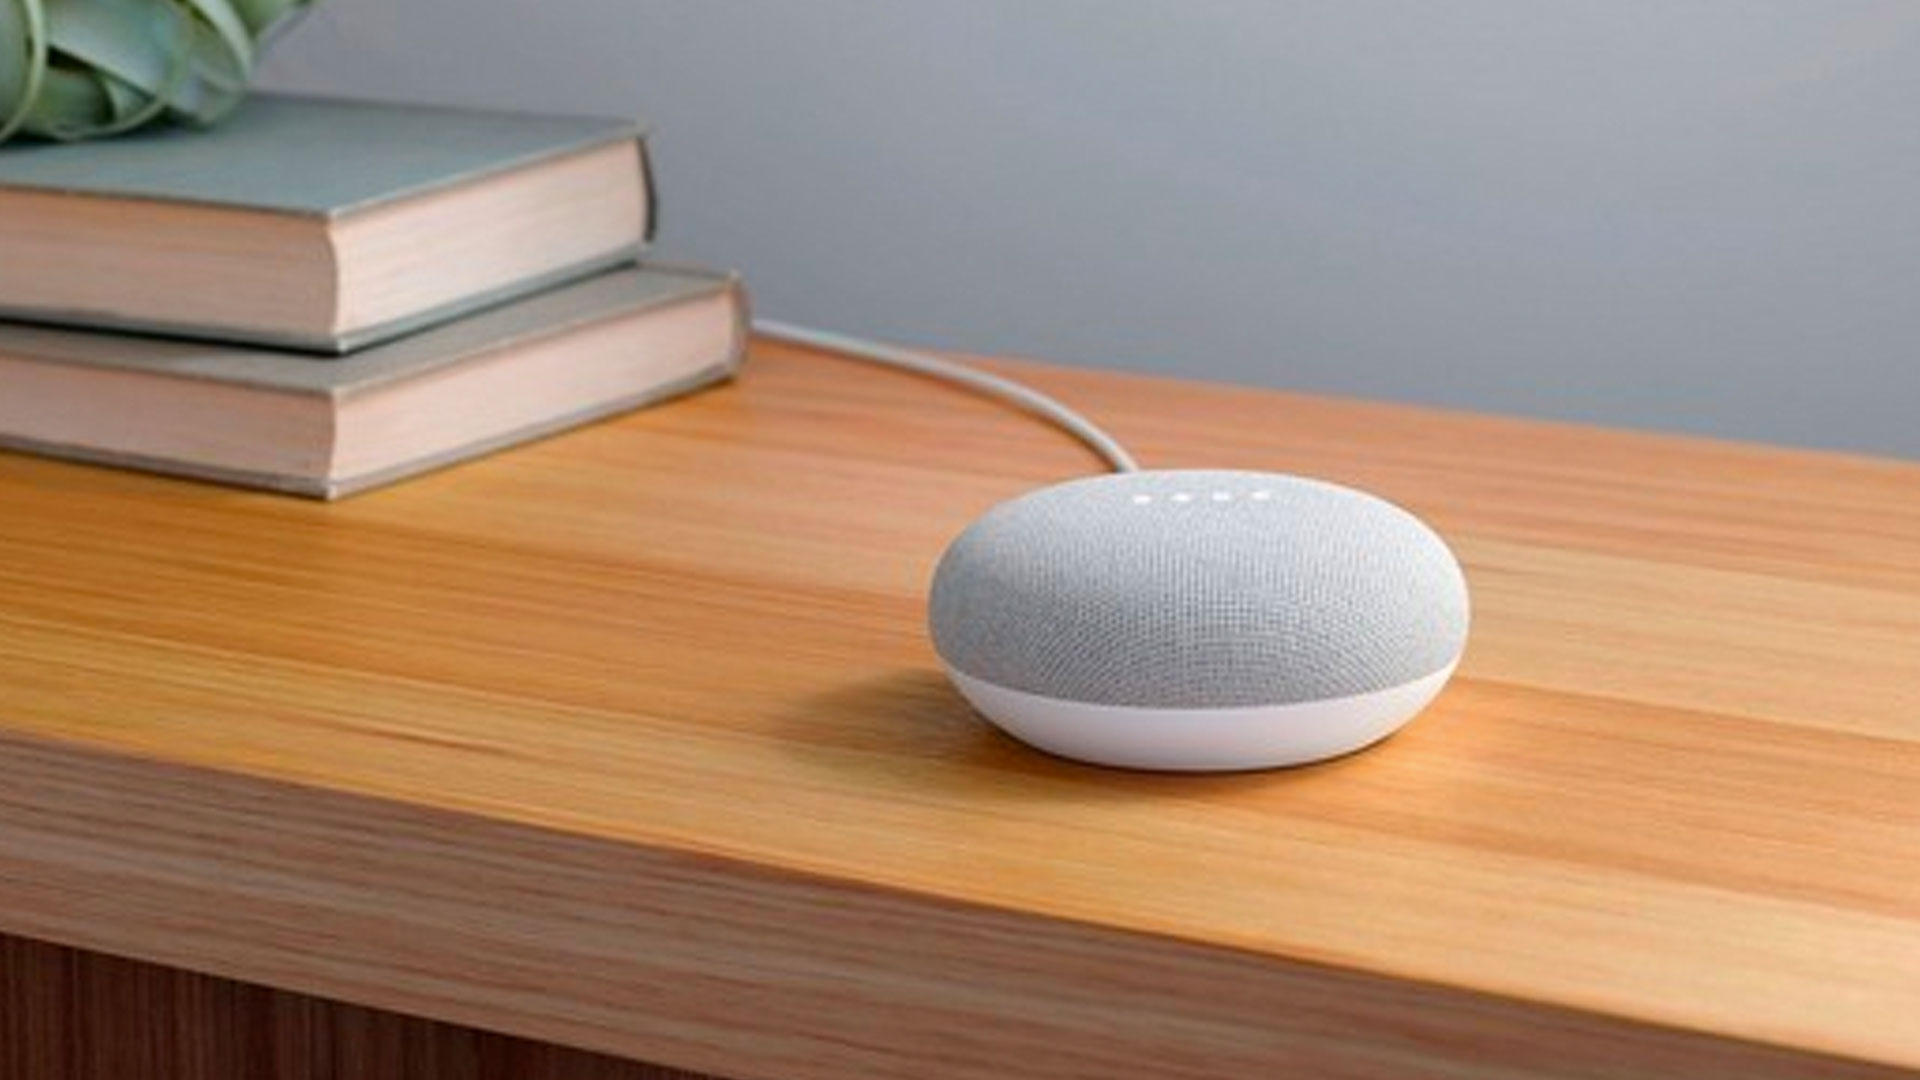 Grab a Google Home Mini for $25 and get even more Google tech with